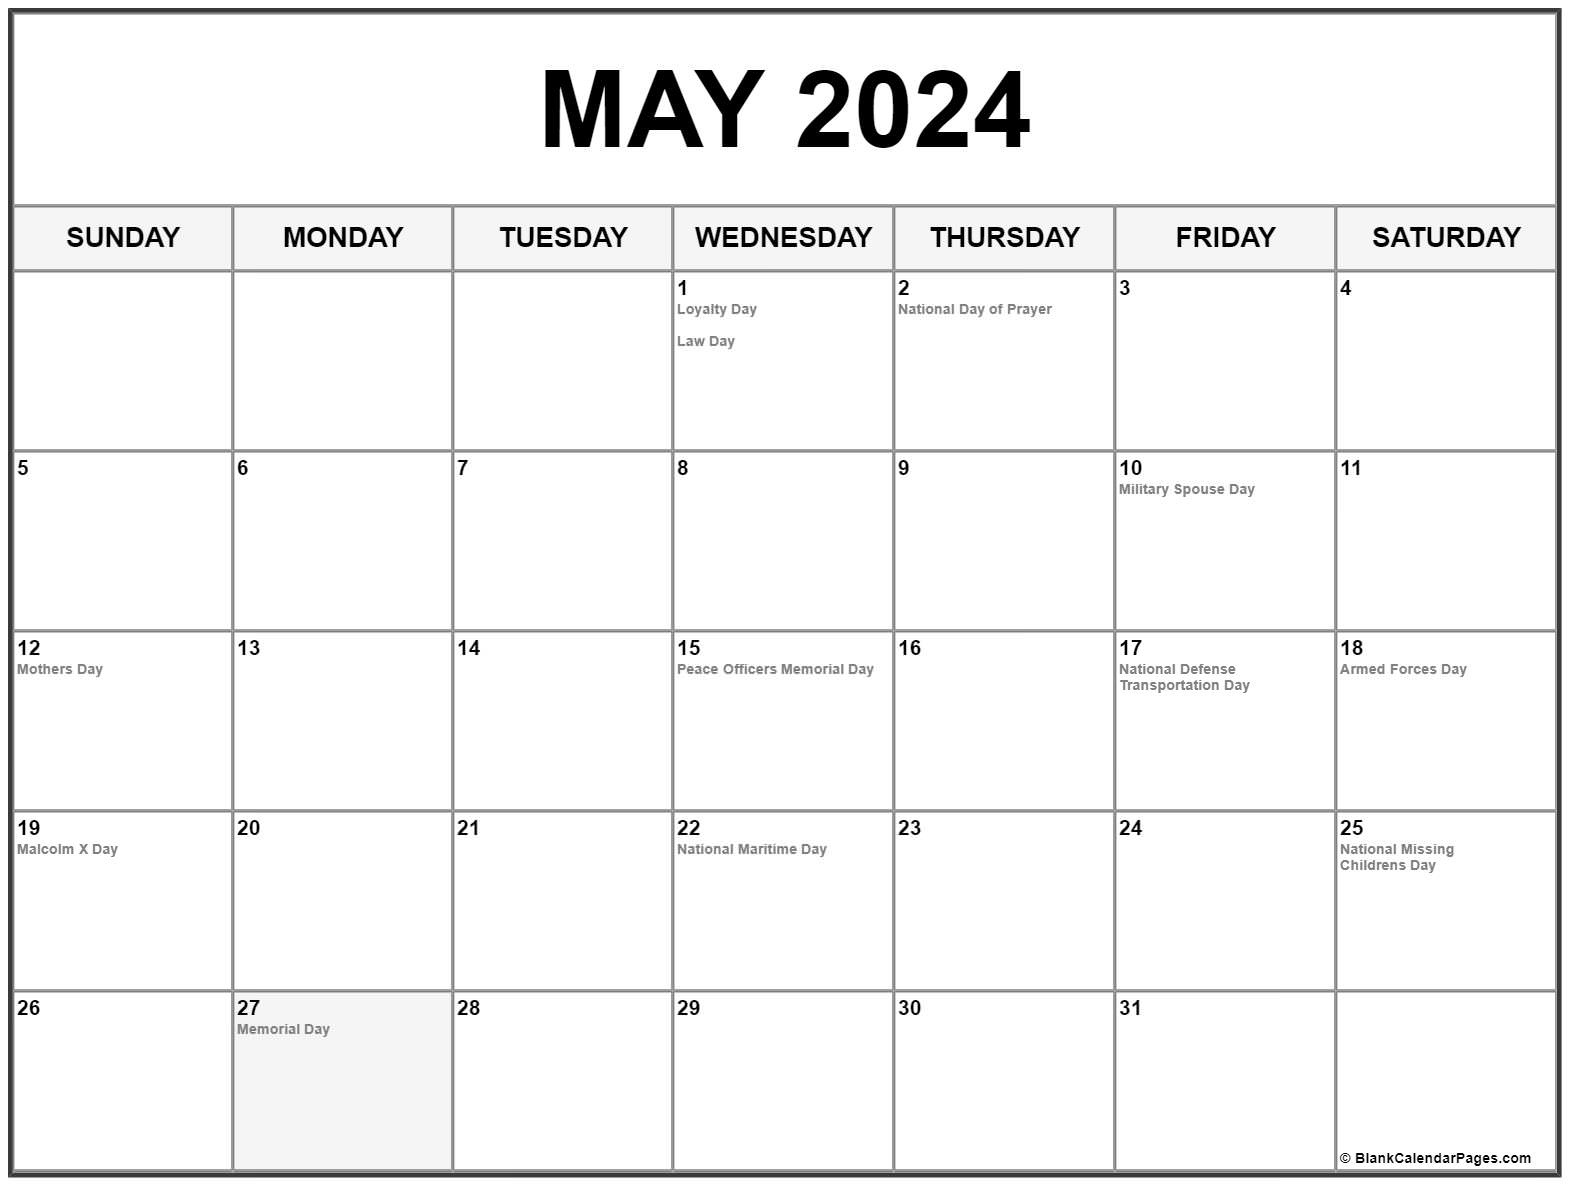 Collection Of May 2019 Calendars With Holidays